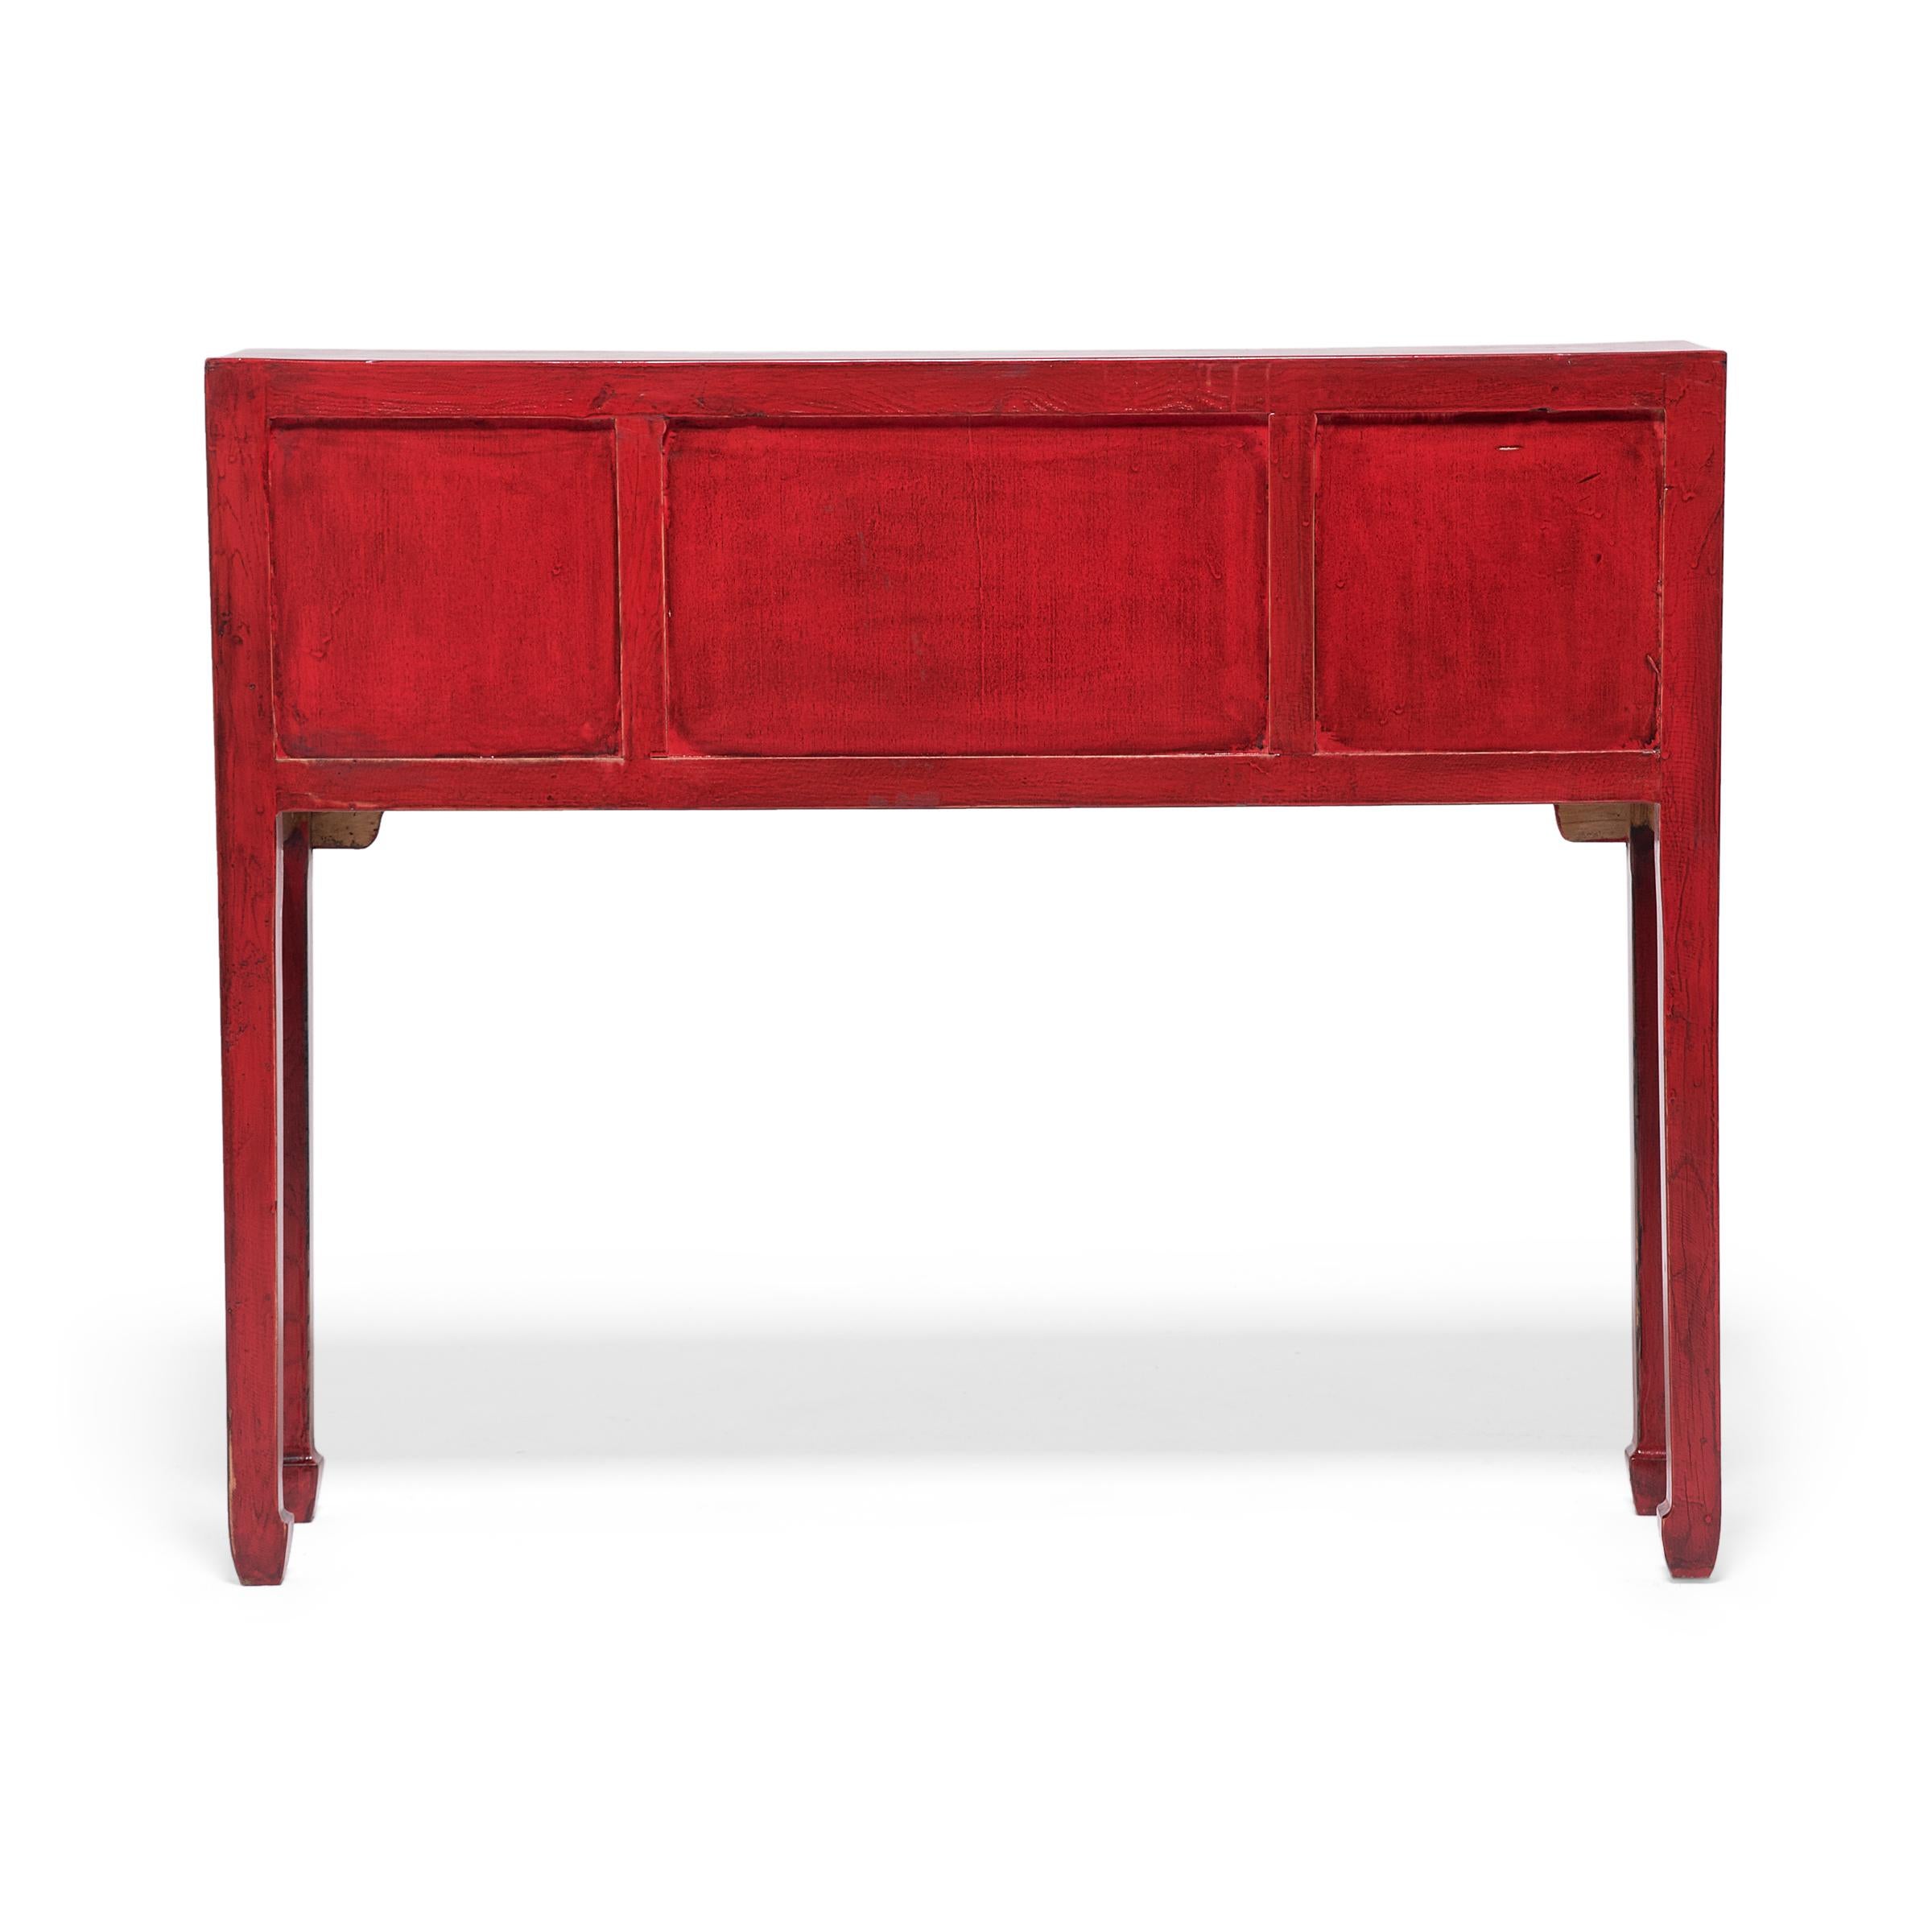 Lacquered Chinese Red Lacquer Altar Coffer